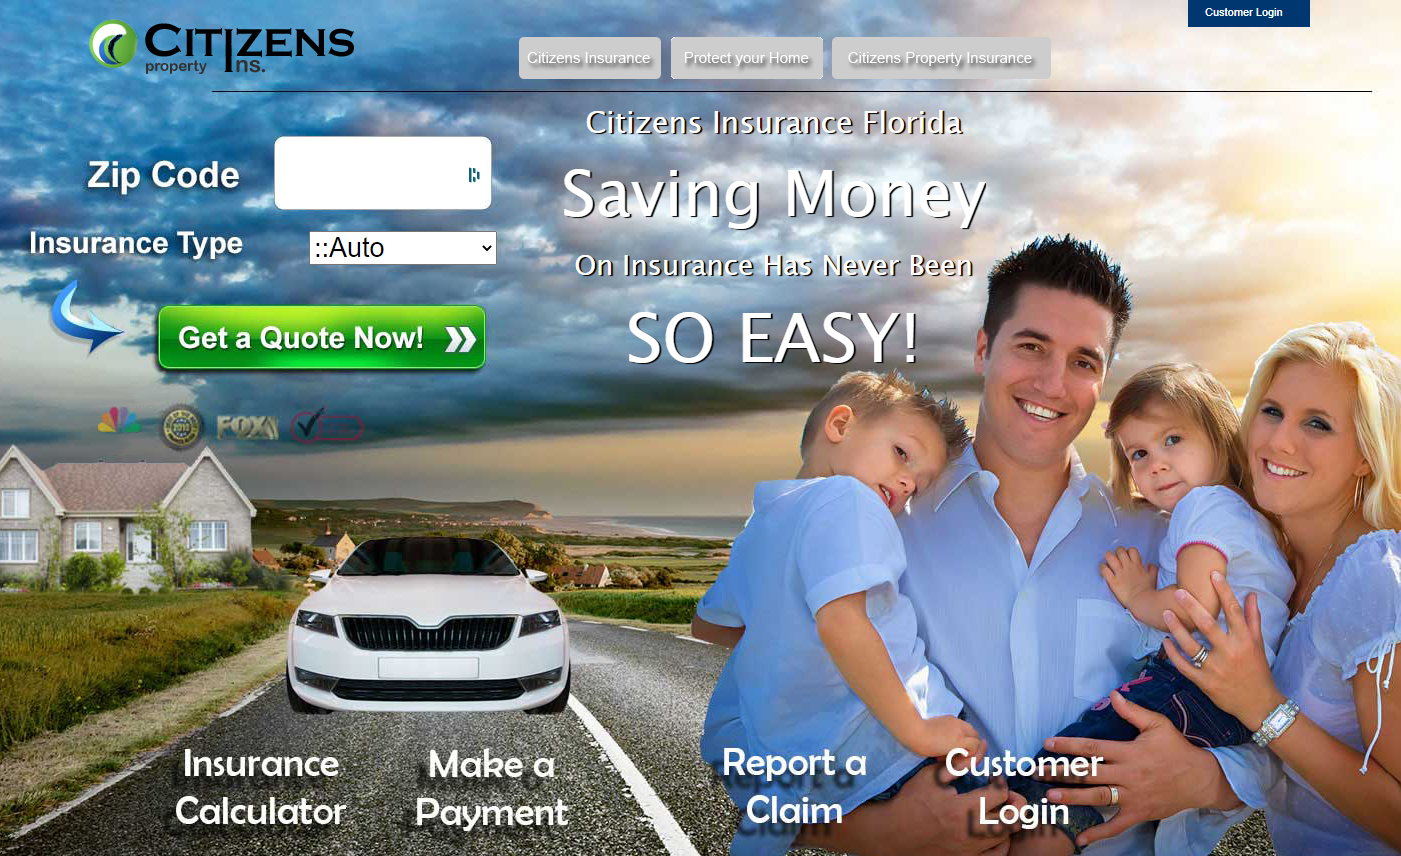 Citizens' Web Site Not Affiliated with Florida Insurer, Takes Users to Auto  Quote Site